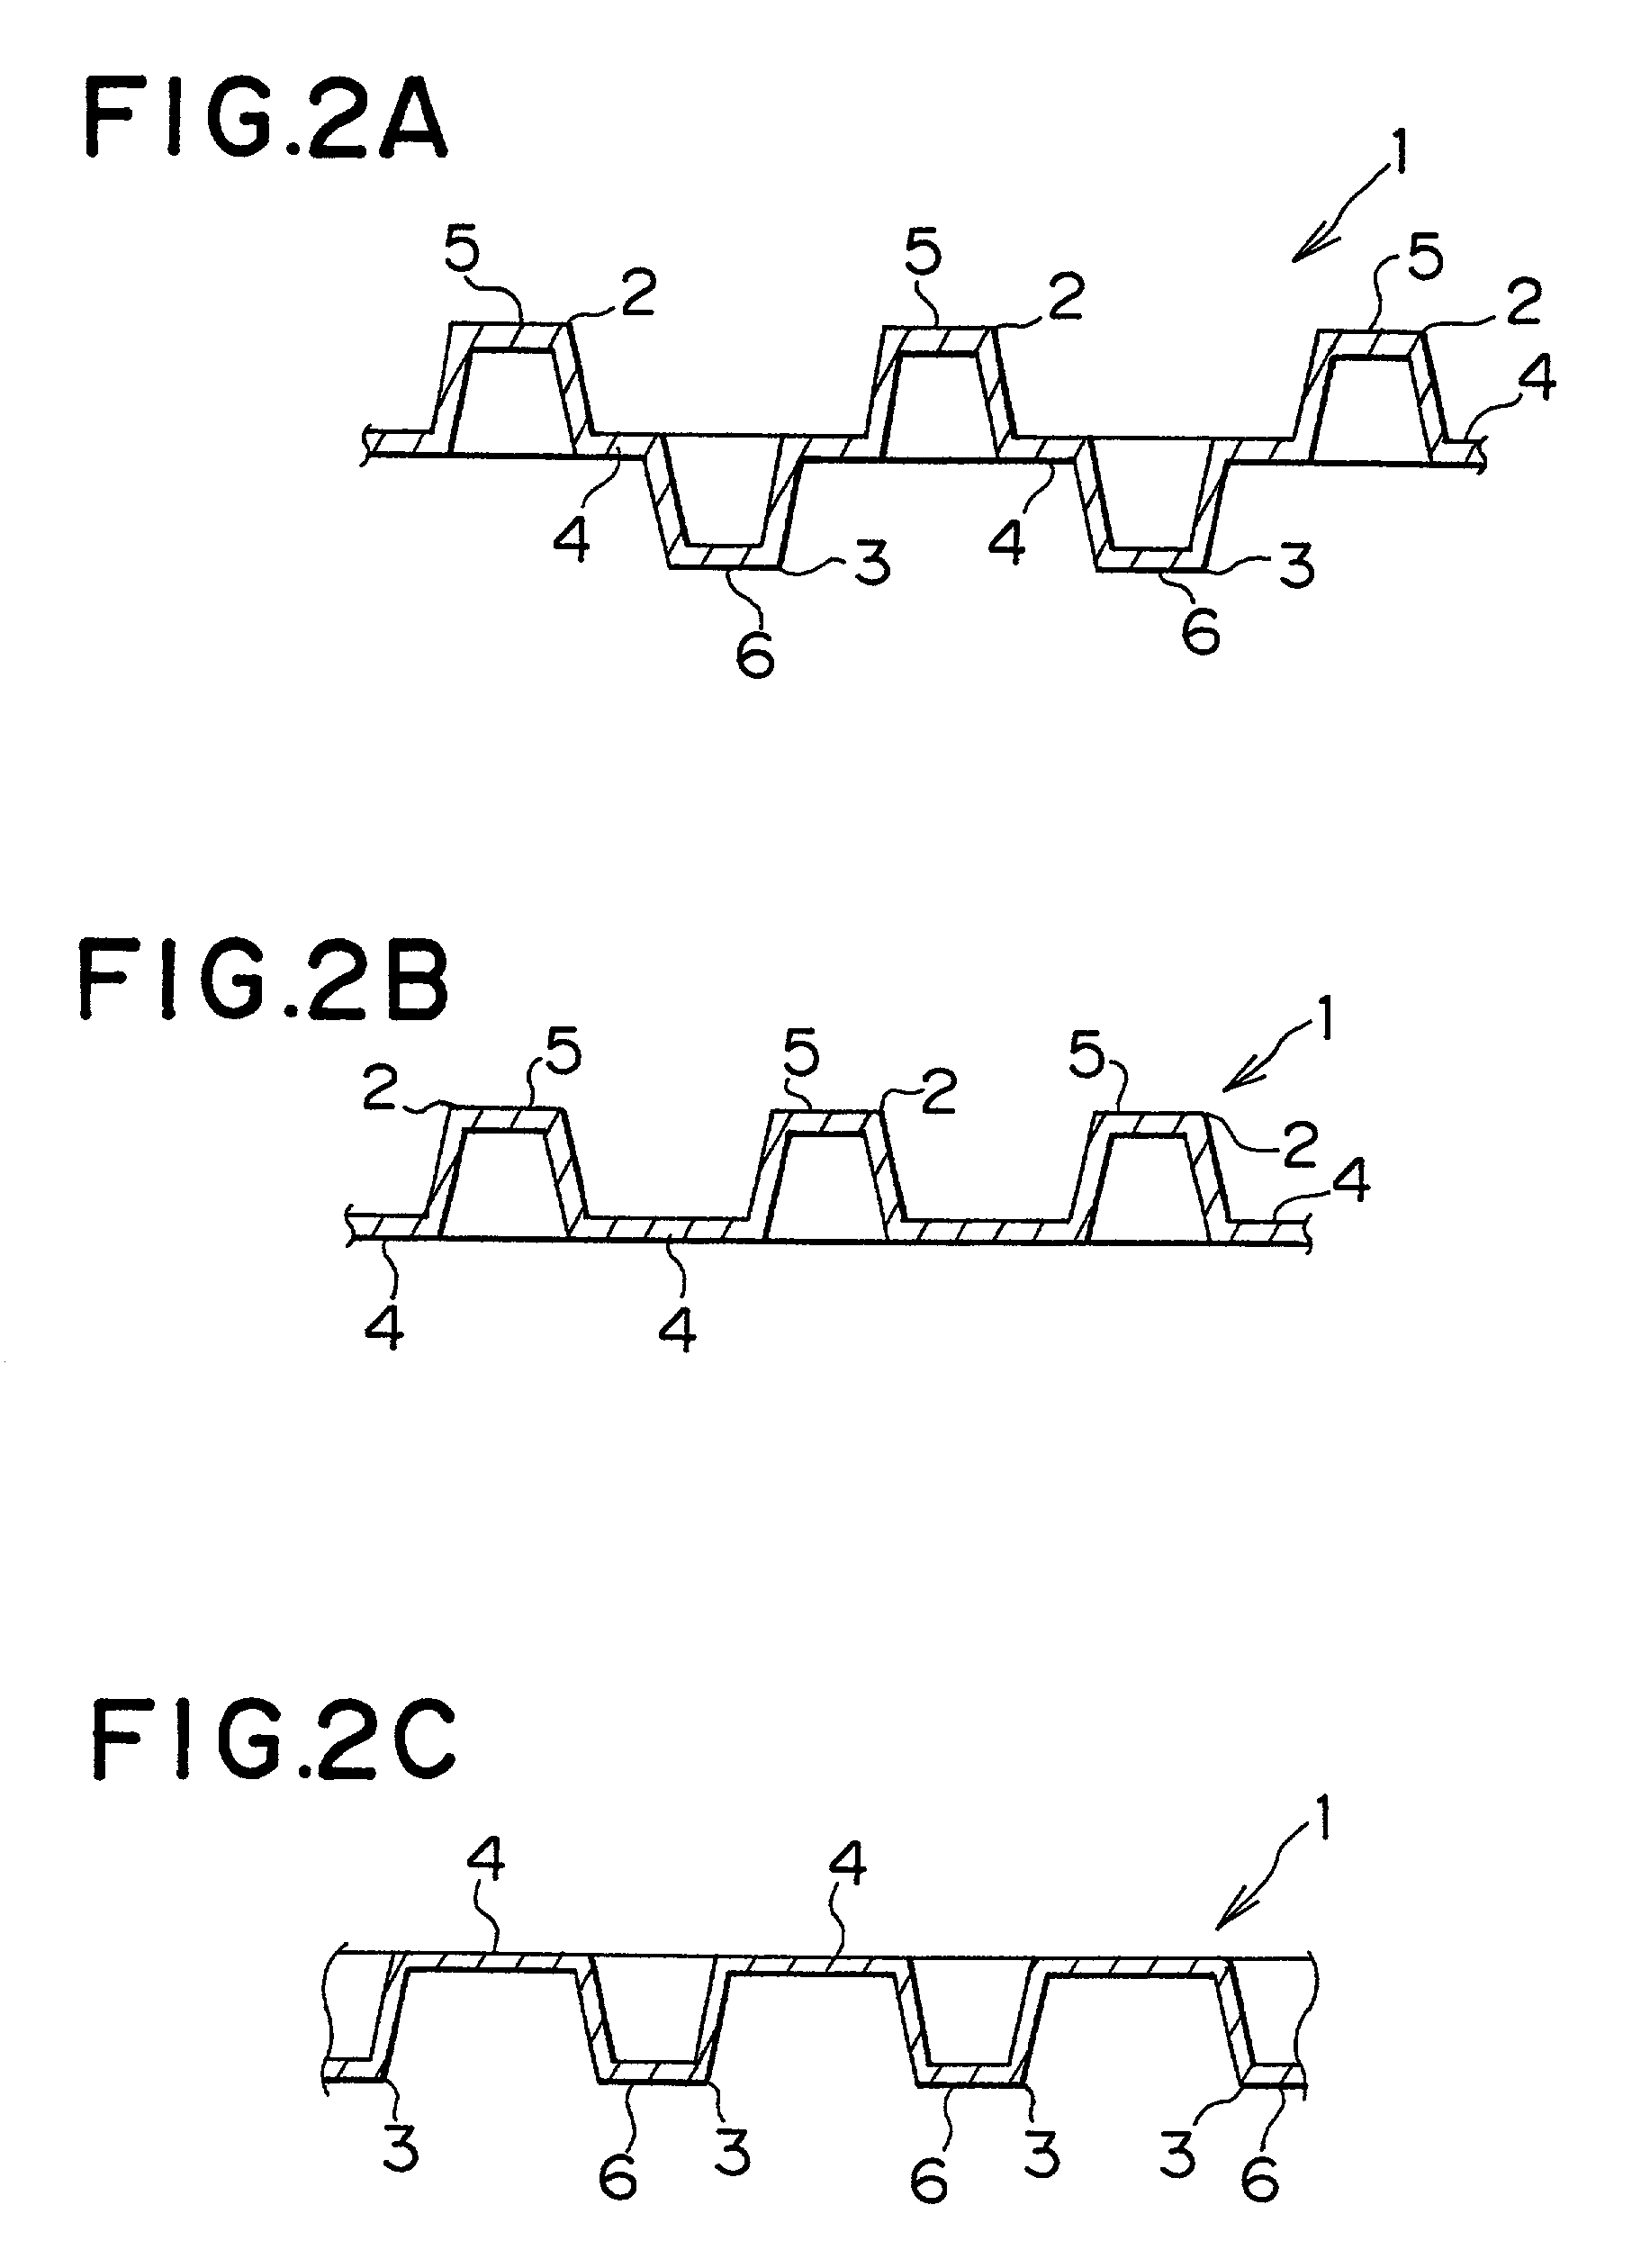 Plate with regular projections, and device and method for forming the plate